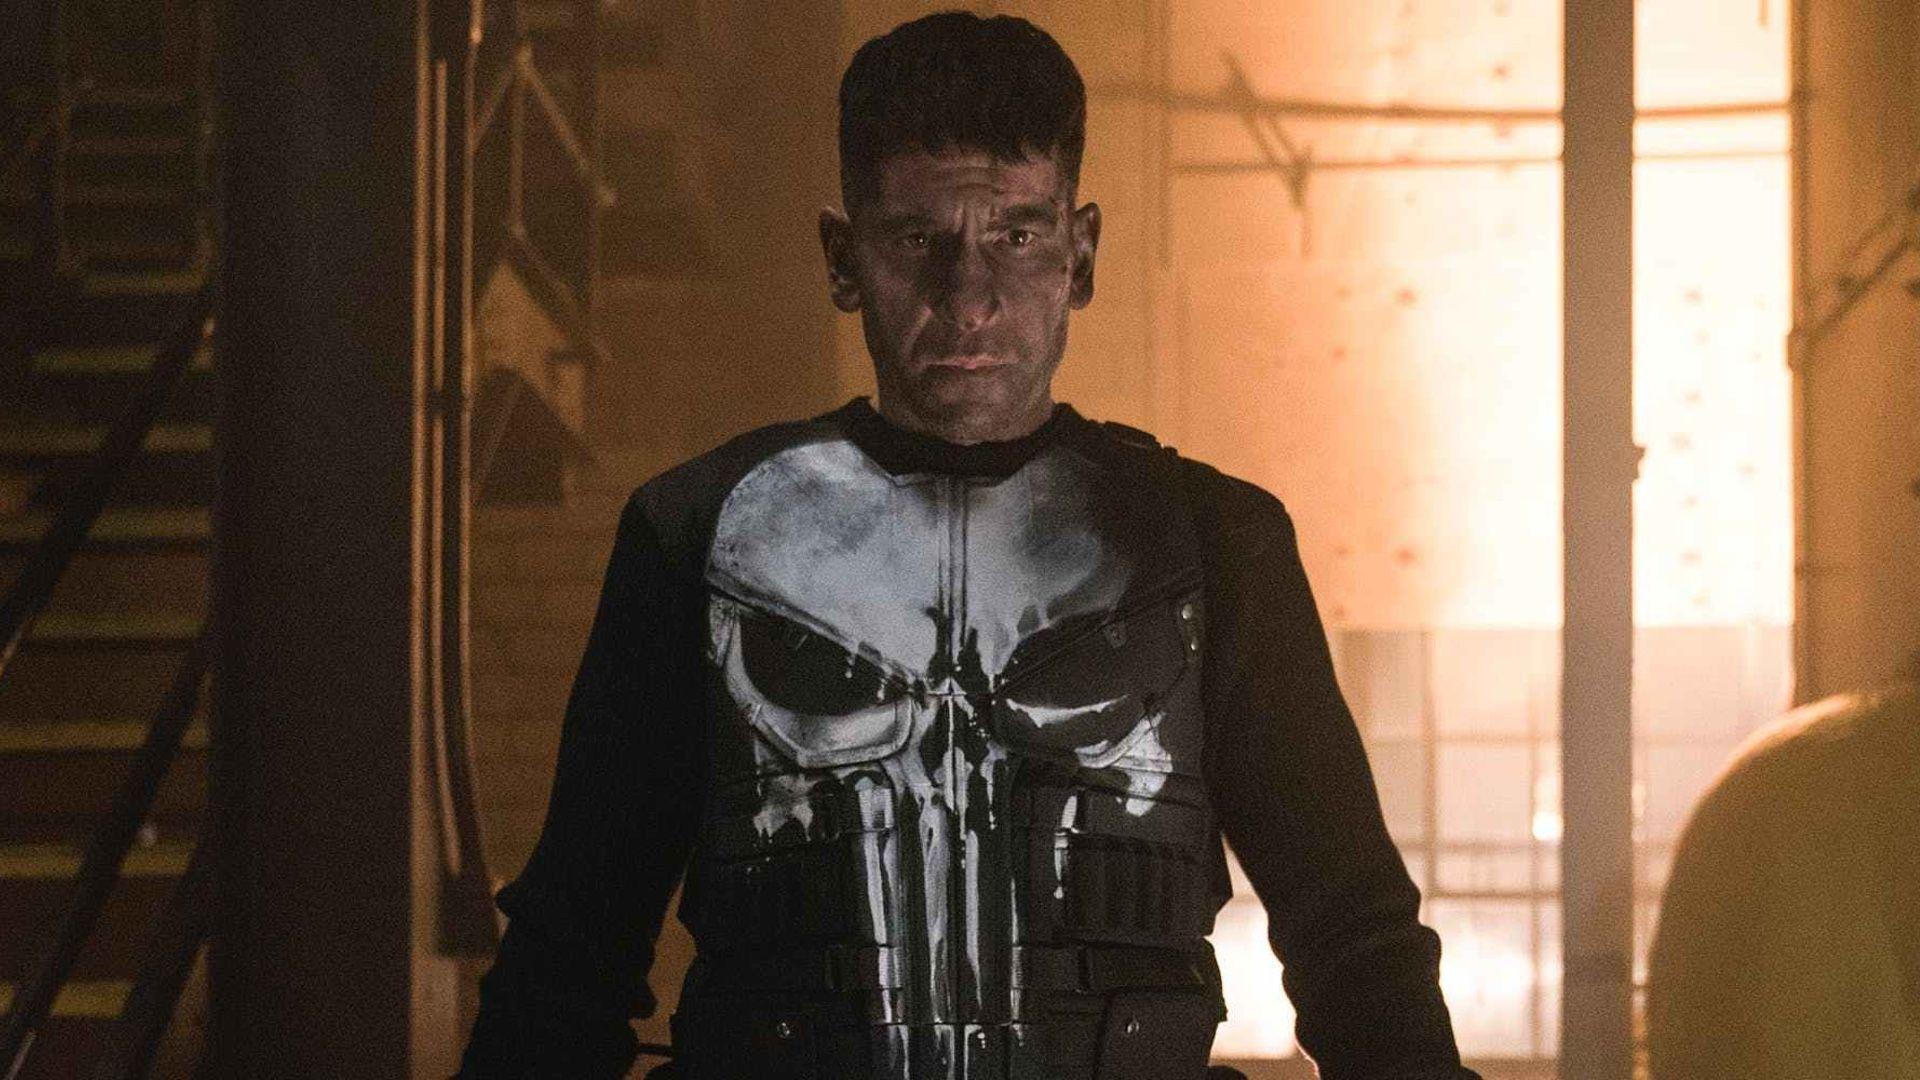 Marvel CCO Says THE PUNISHER Season 2 is Crazy and Exactly What